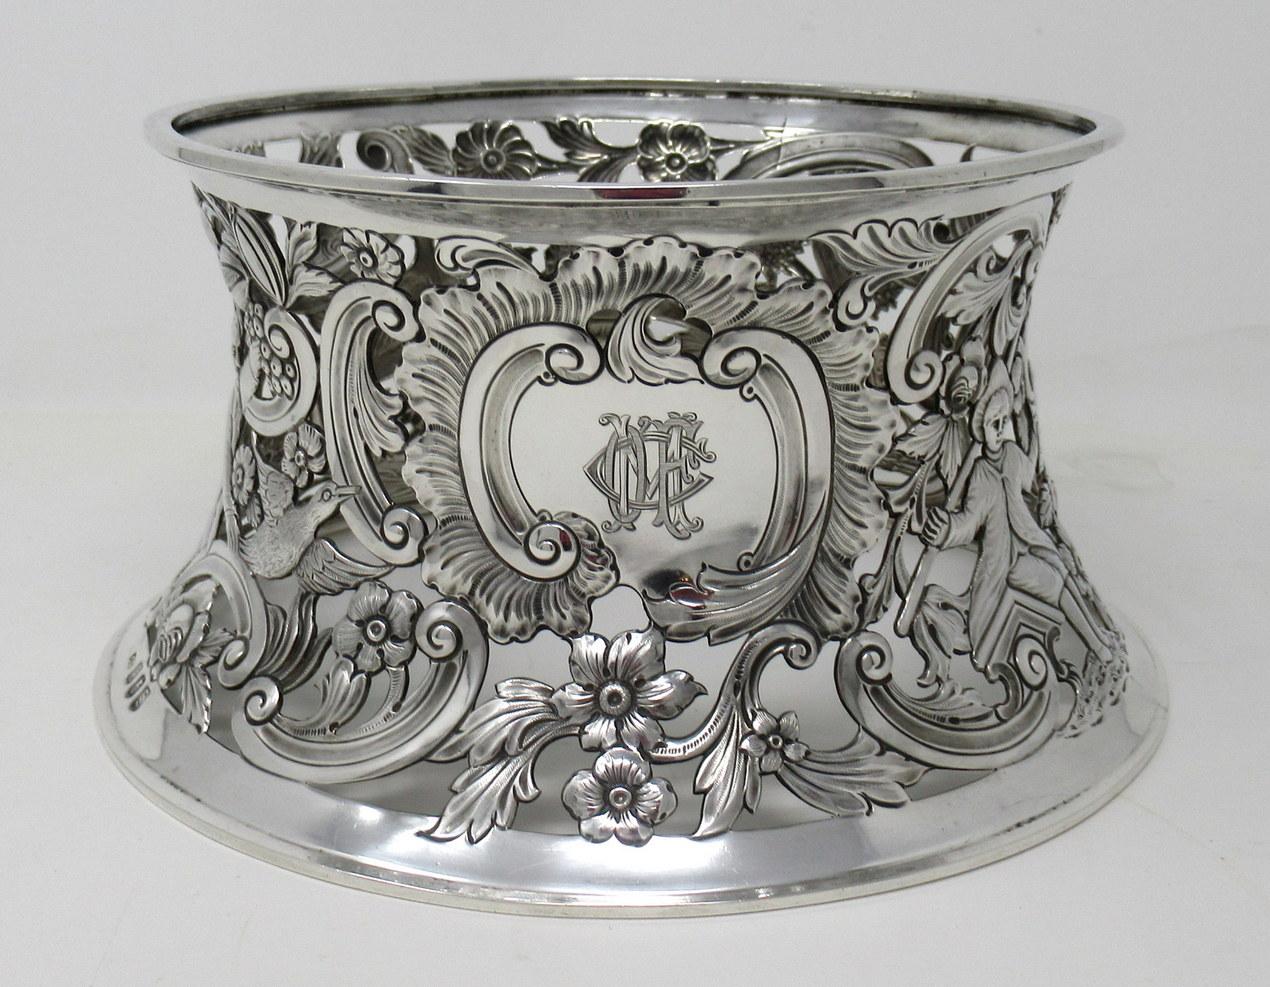 An exquisite Irish Georgian style Dublin silver heavy gauge table dish ring of traditional waisted form and unusually large size.

The circular inverted sided lavish pierced body depicting birds in flight, a shepherd, fisherman and a peasant in